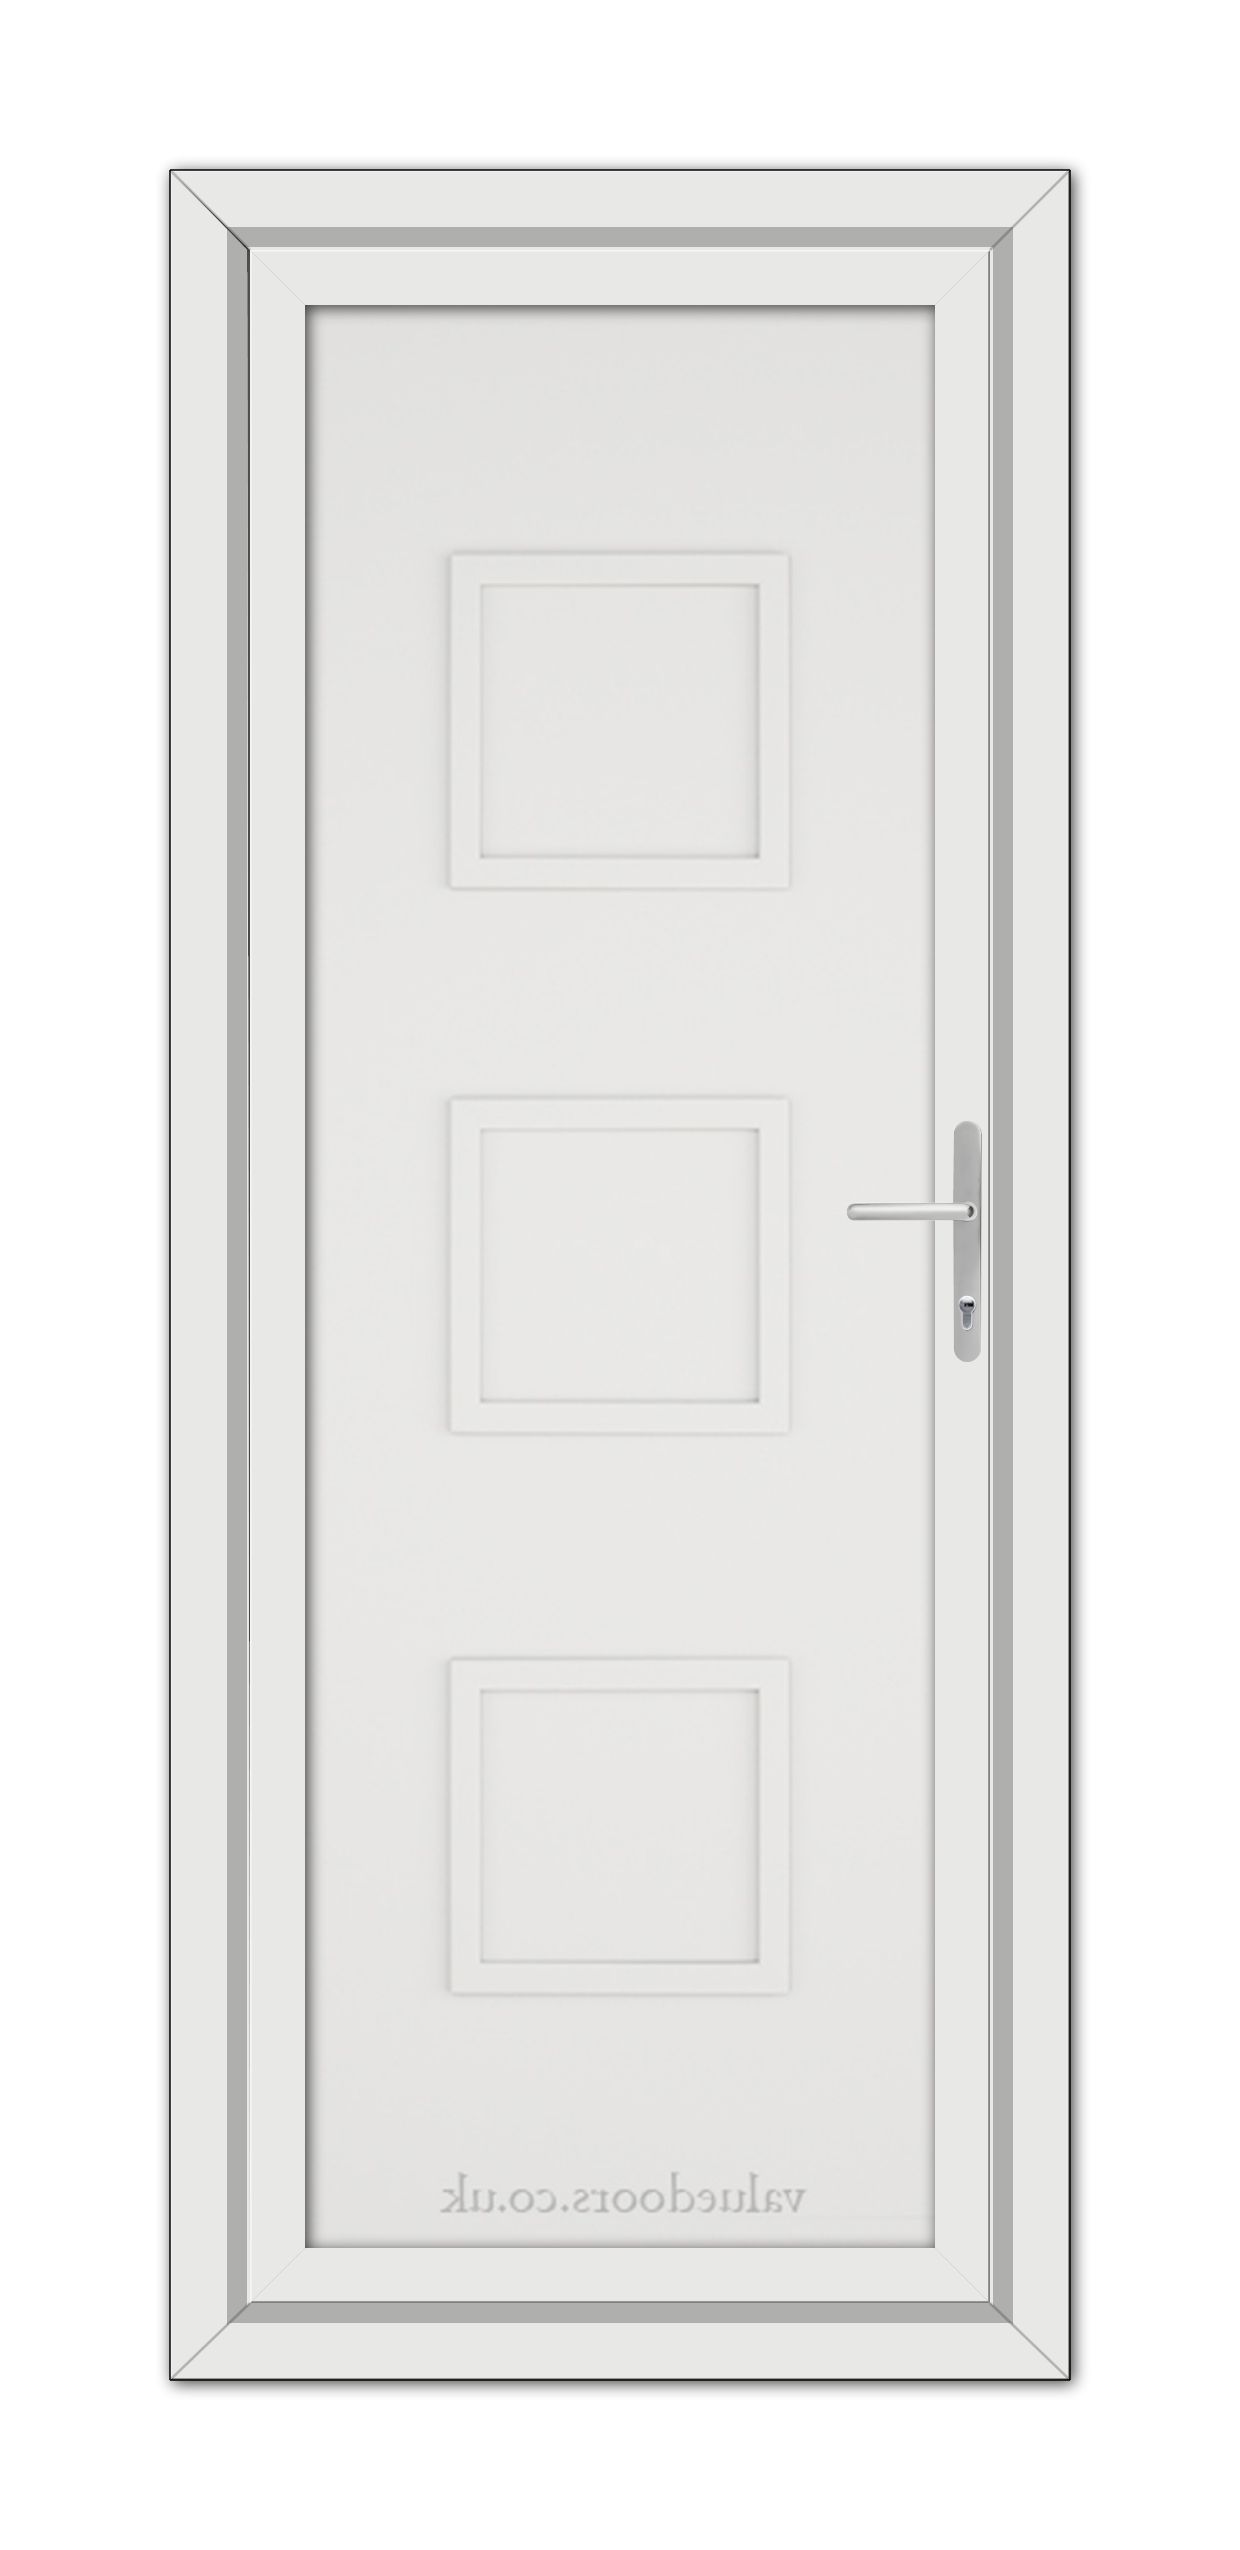 White Modern 5013 Solid uPVC Door with three recessed panels and a silver handle, viewed from the front.